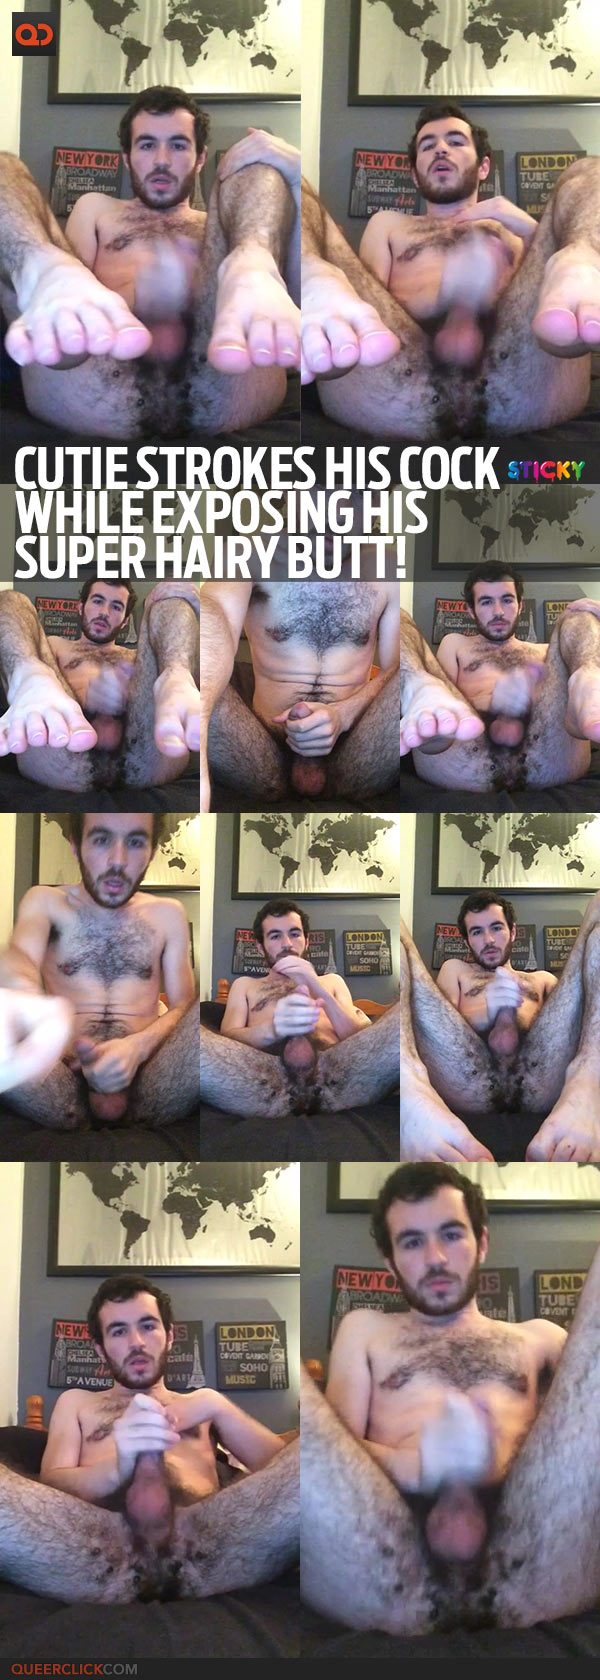 Cutie Strokes His Cock While Exposing His Super Hairy Butt!